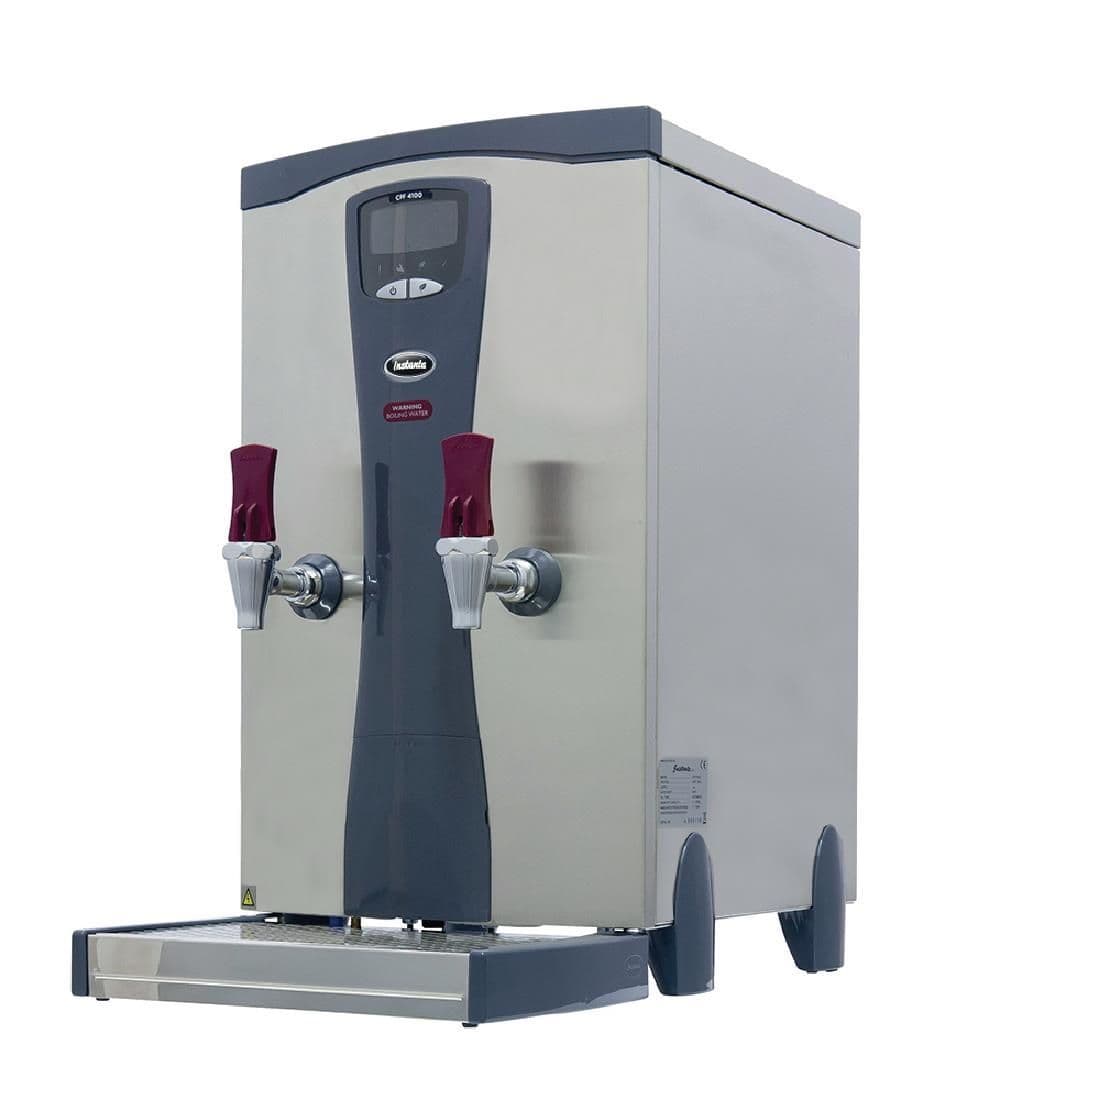 GF478 Instanta Eco Autofill Countertop Twin Tap Water Boiler 3kW CPF4100-3 JD Catering Equipment Solutions Ltd